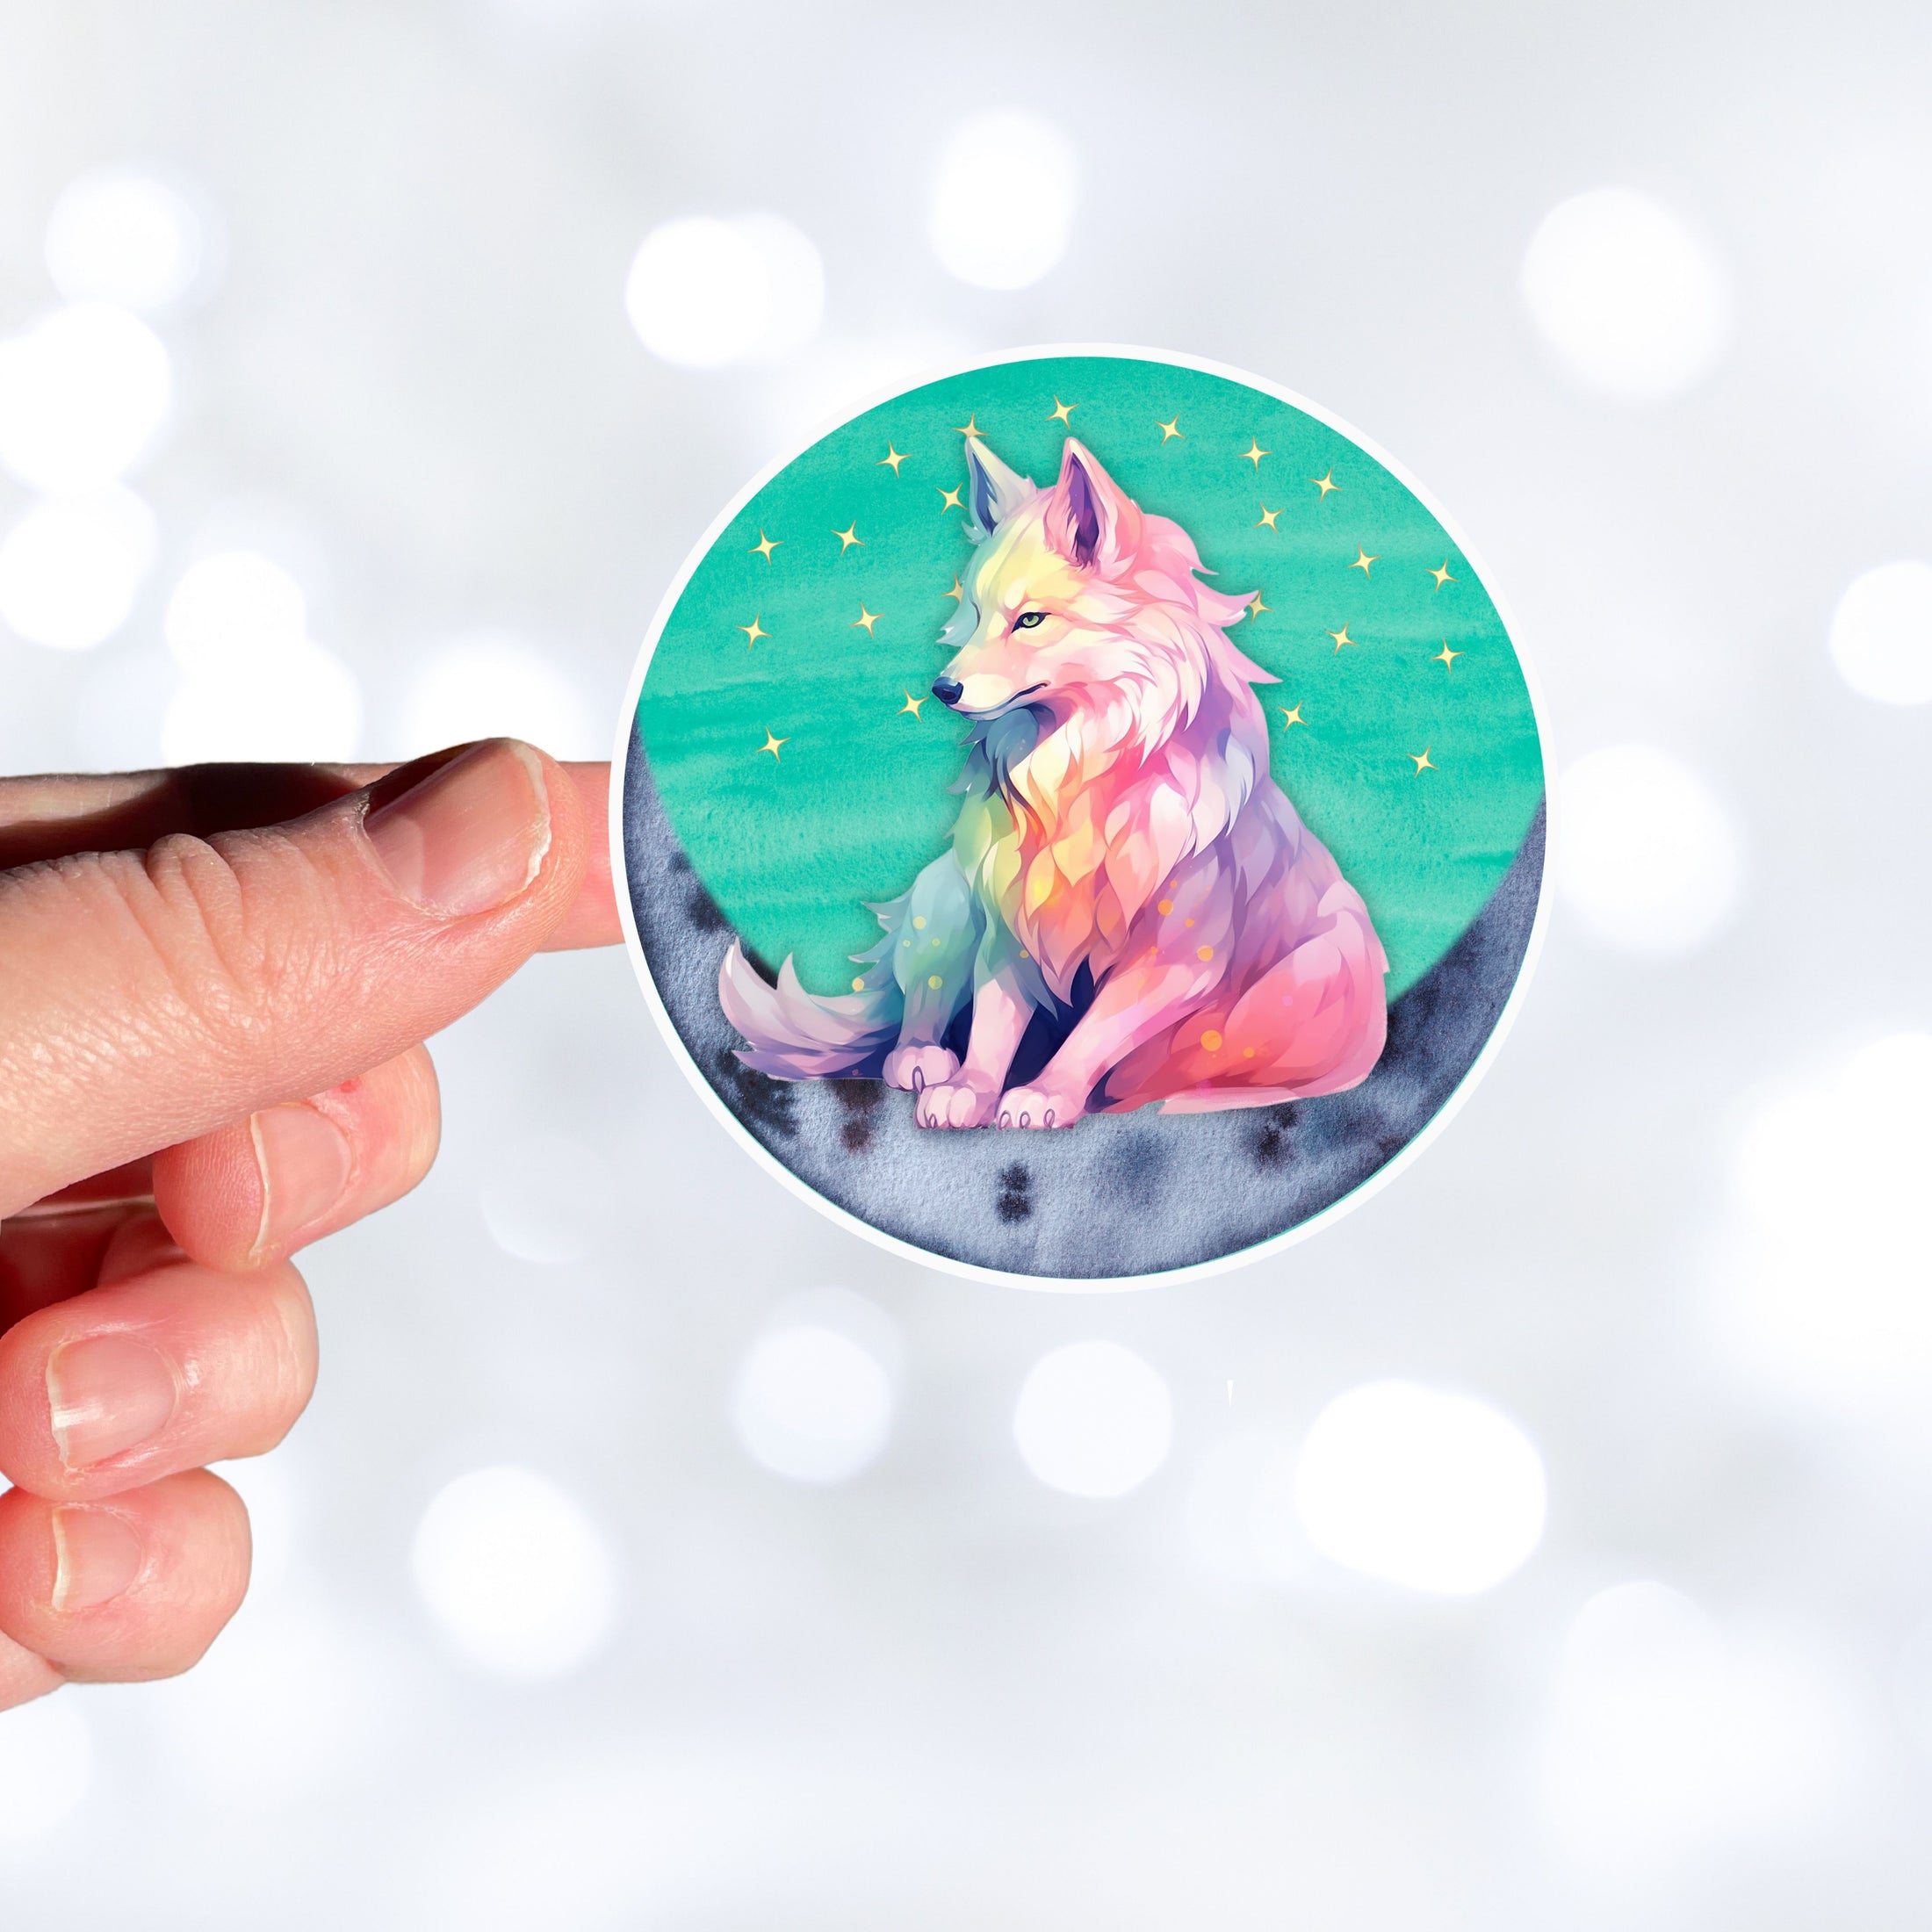 This image shows a hand holding the starry wolf sticker.